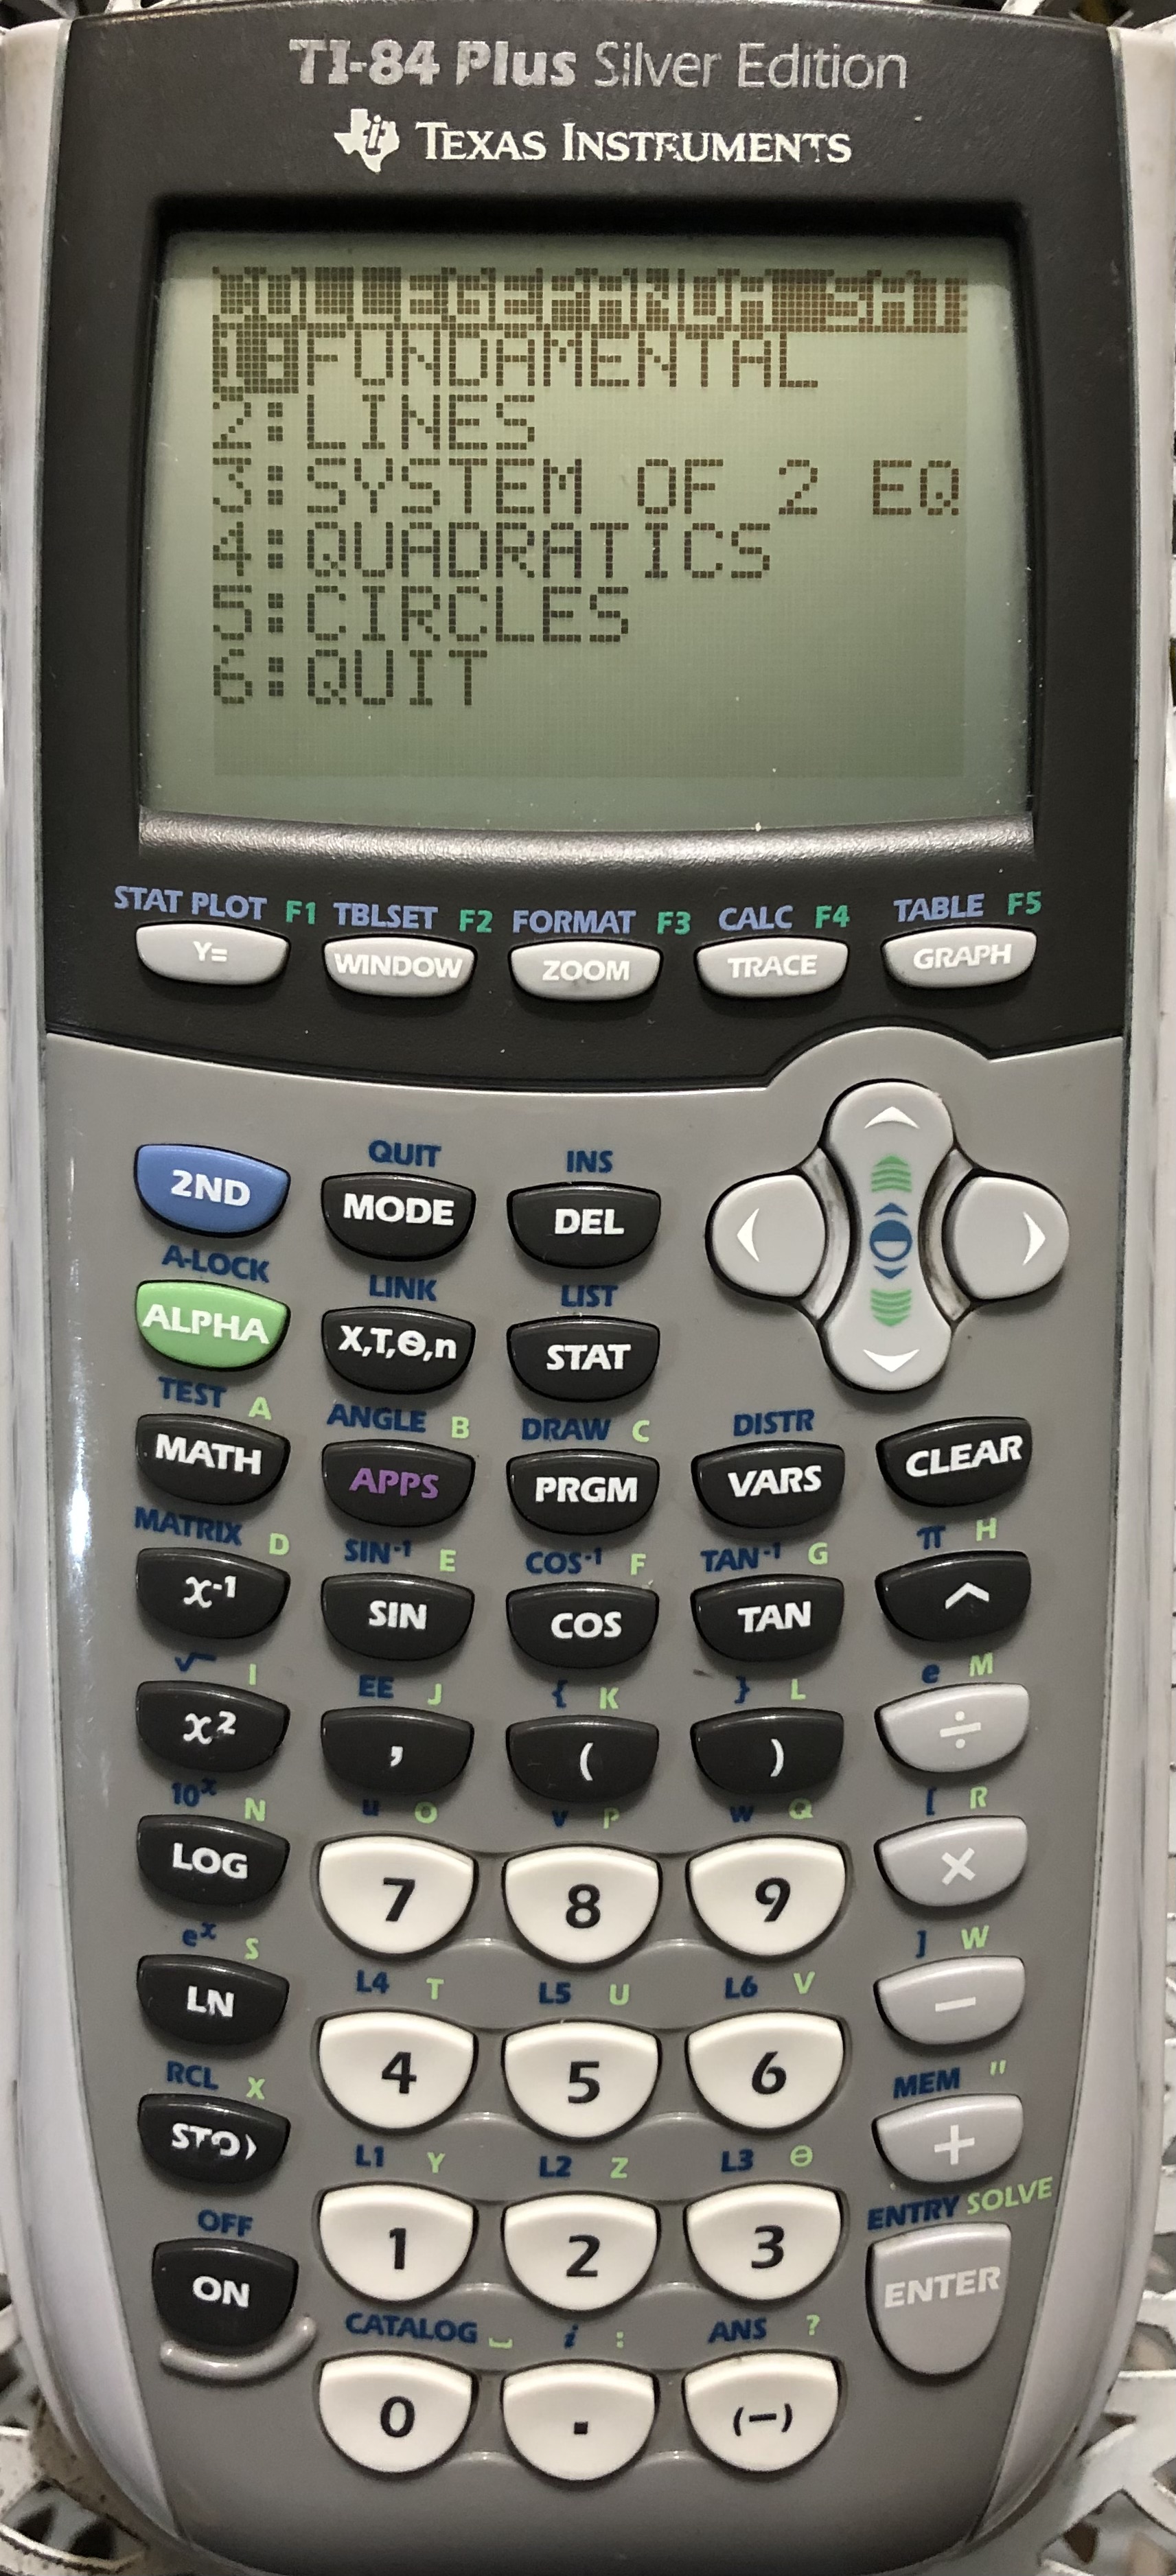 How to Calculate Y Value on Ti 84 